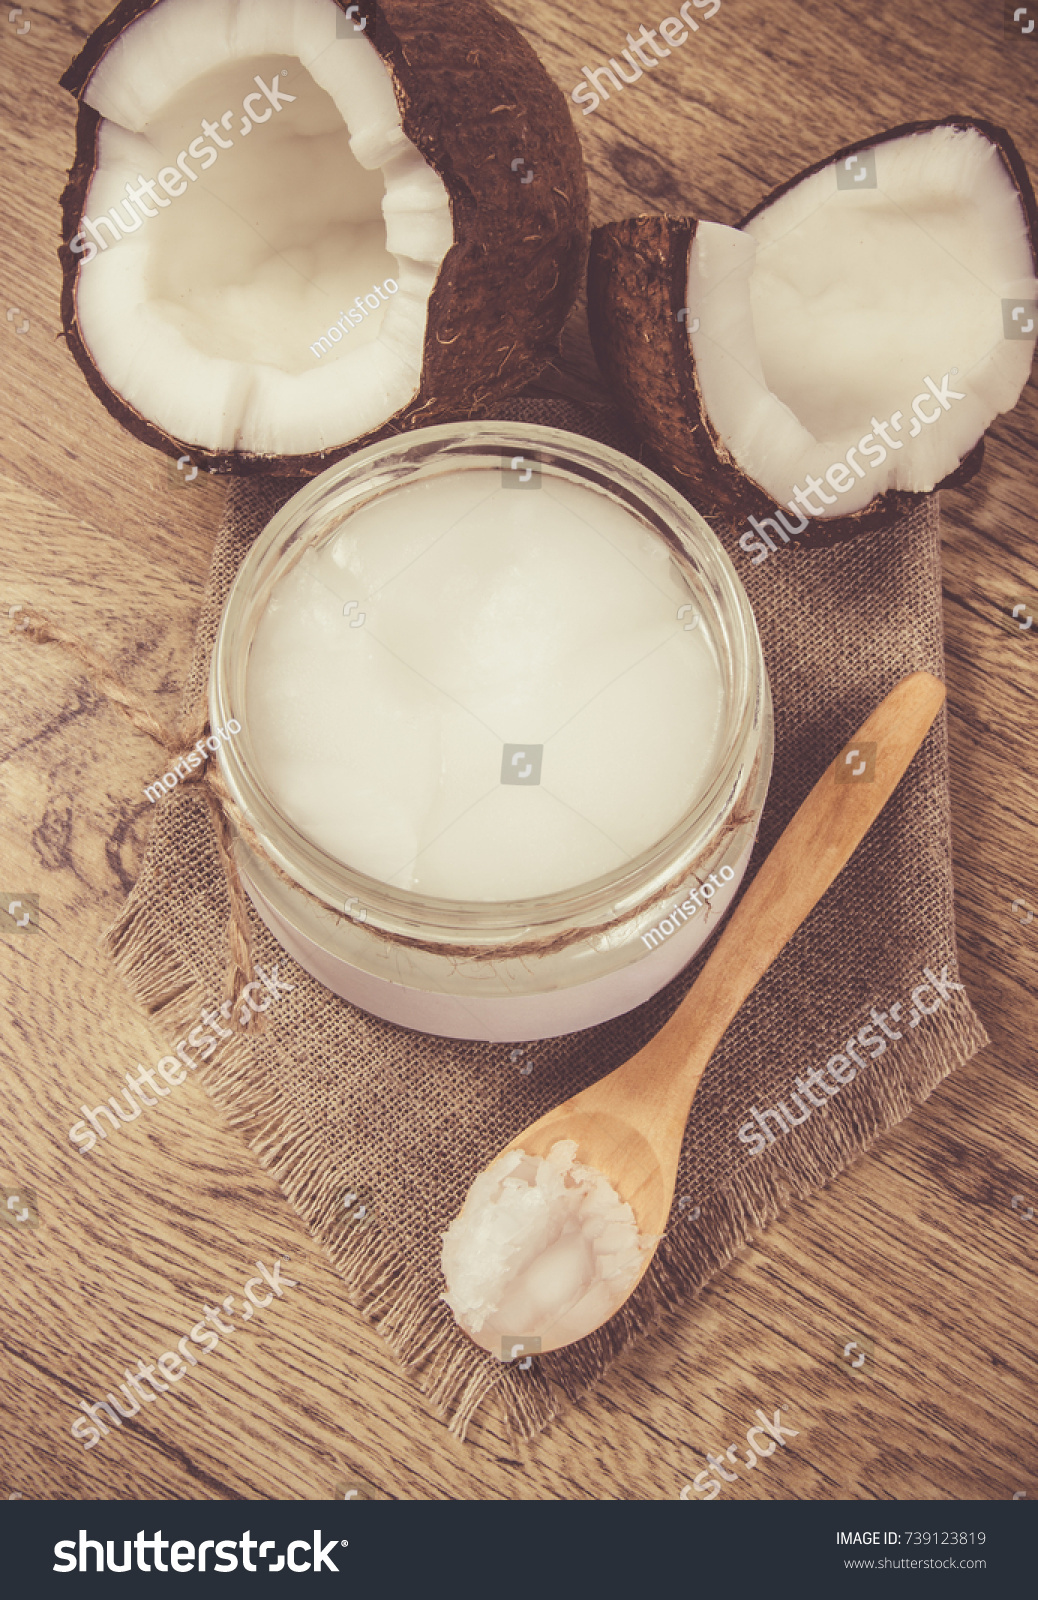 Download Opened Glass Jar Fresh Coconut Oil Stock Photo Edit Now 739123819 PSD Mockup Templates